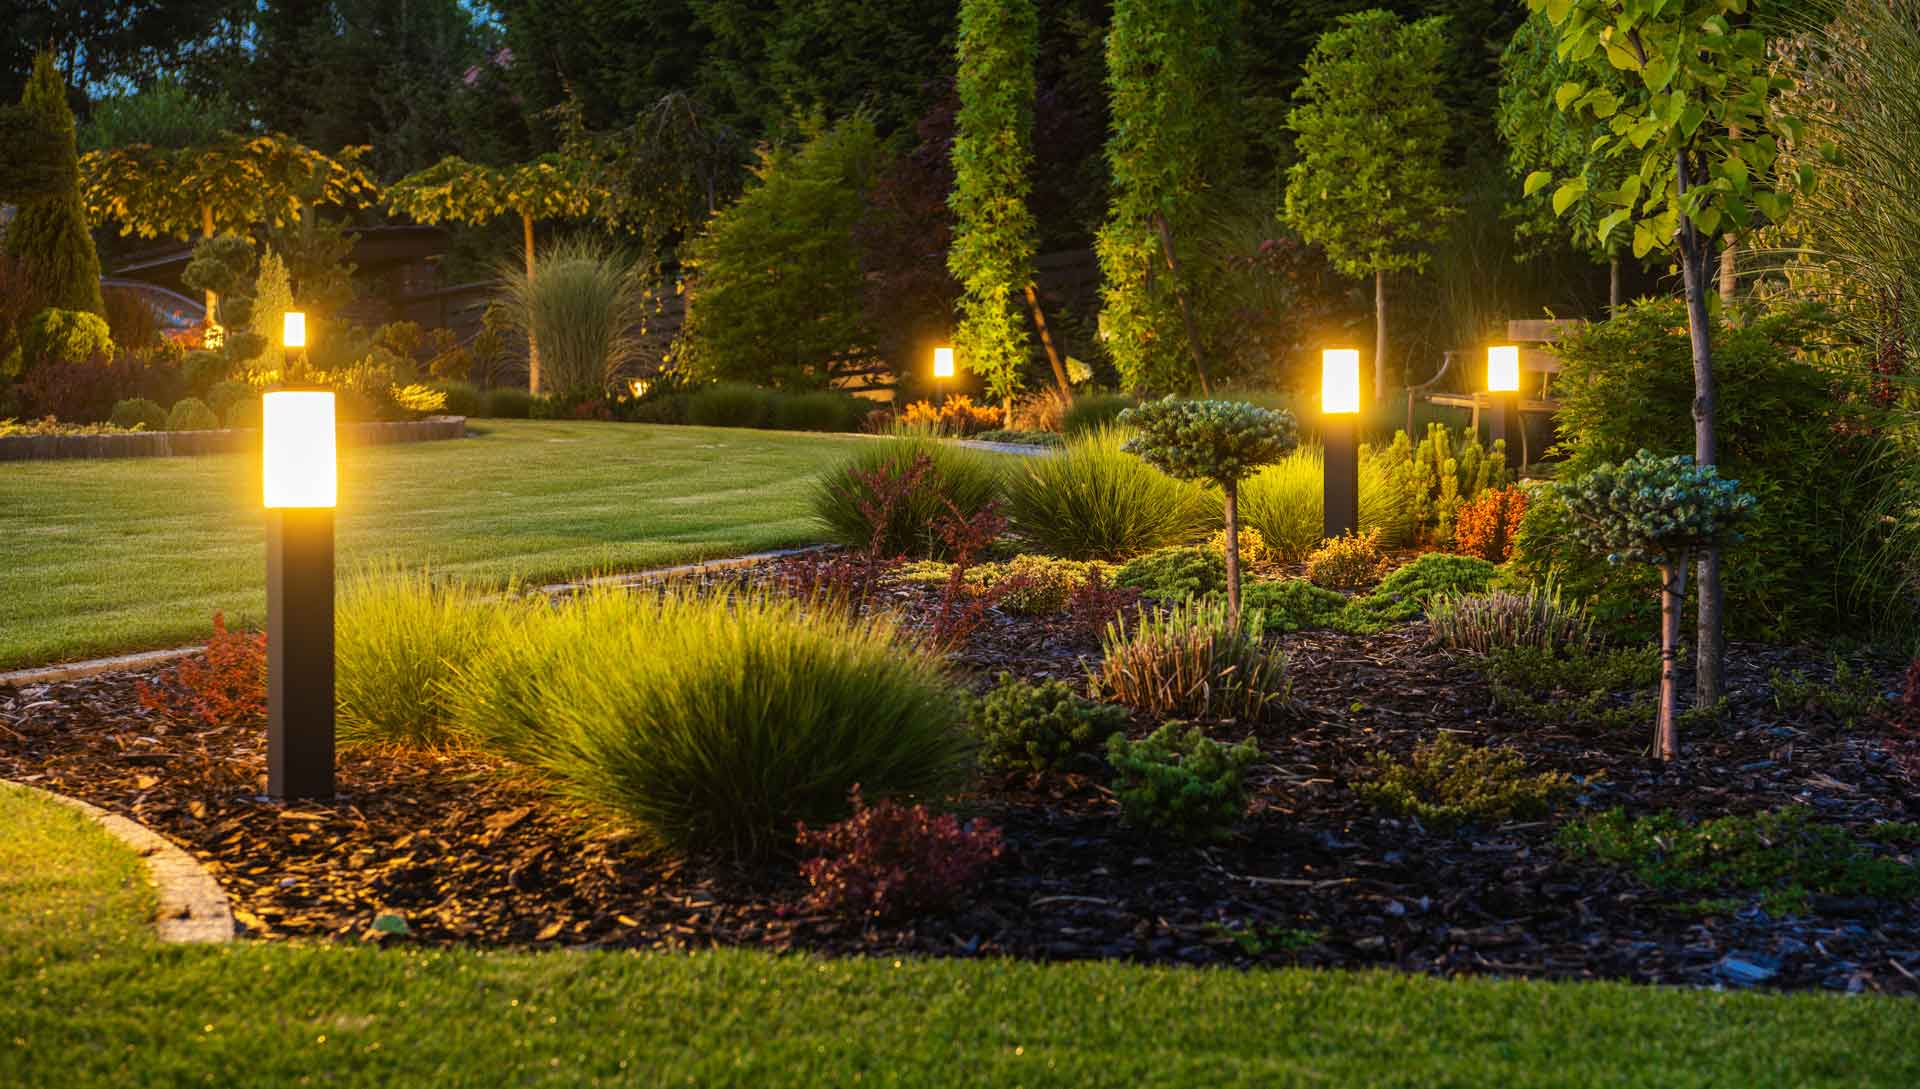 Beautifully landscaped flowerbed at dusk